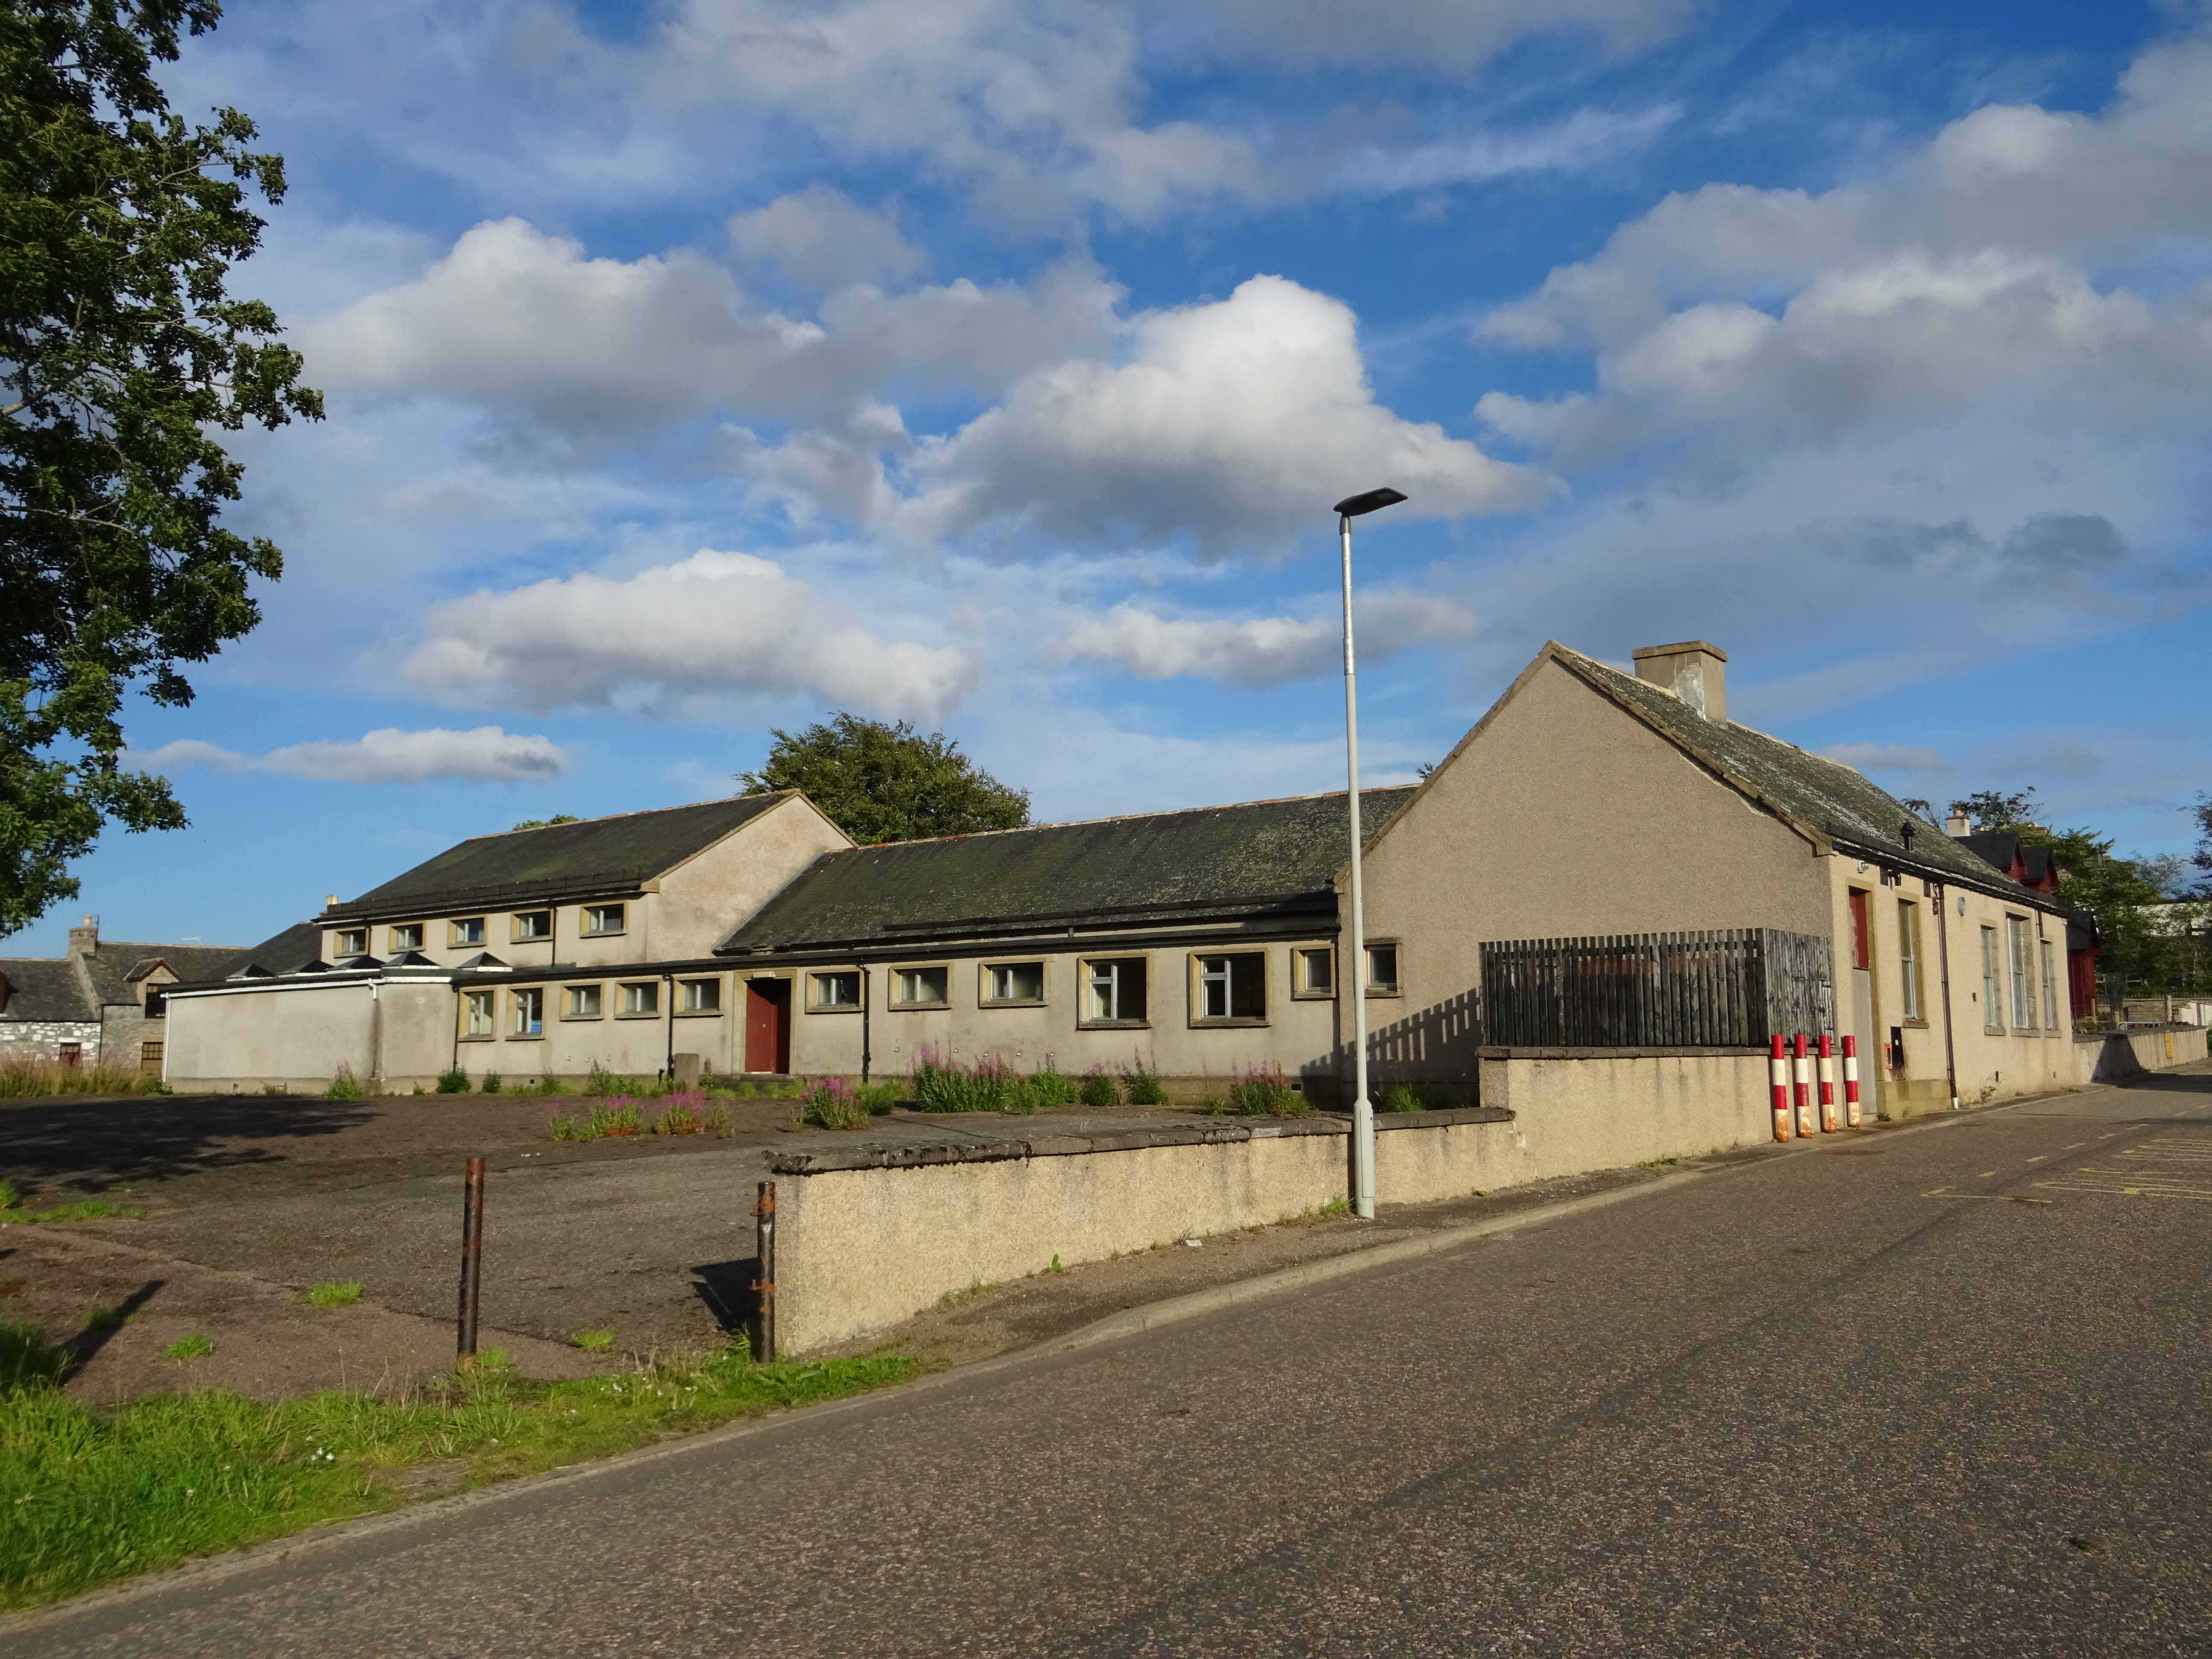 Housing plans approved at former Tomintoul school site